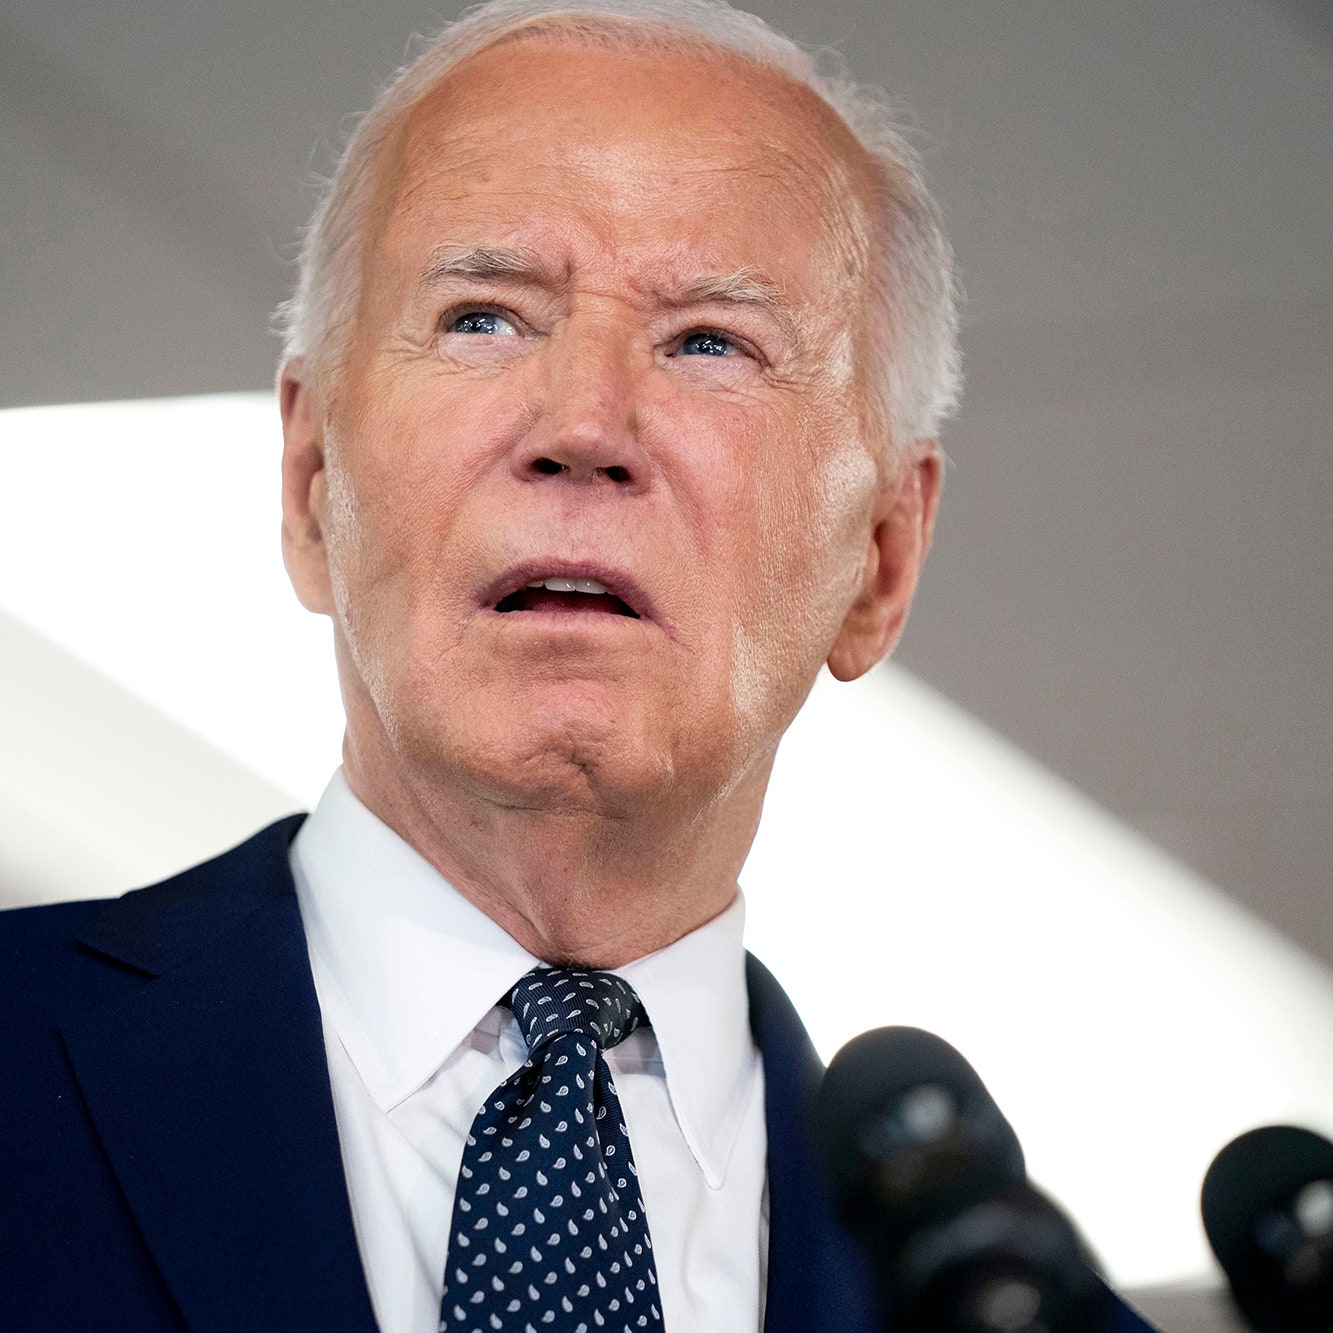 Joe Biden on J.D. Vance, His Call With Trump, and Why He’s Staying in the Race